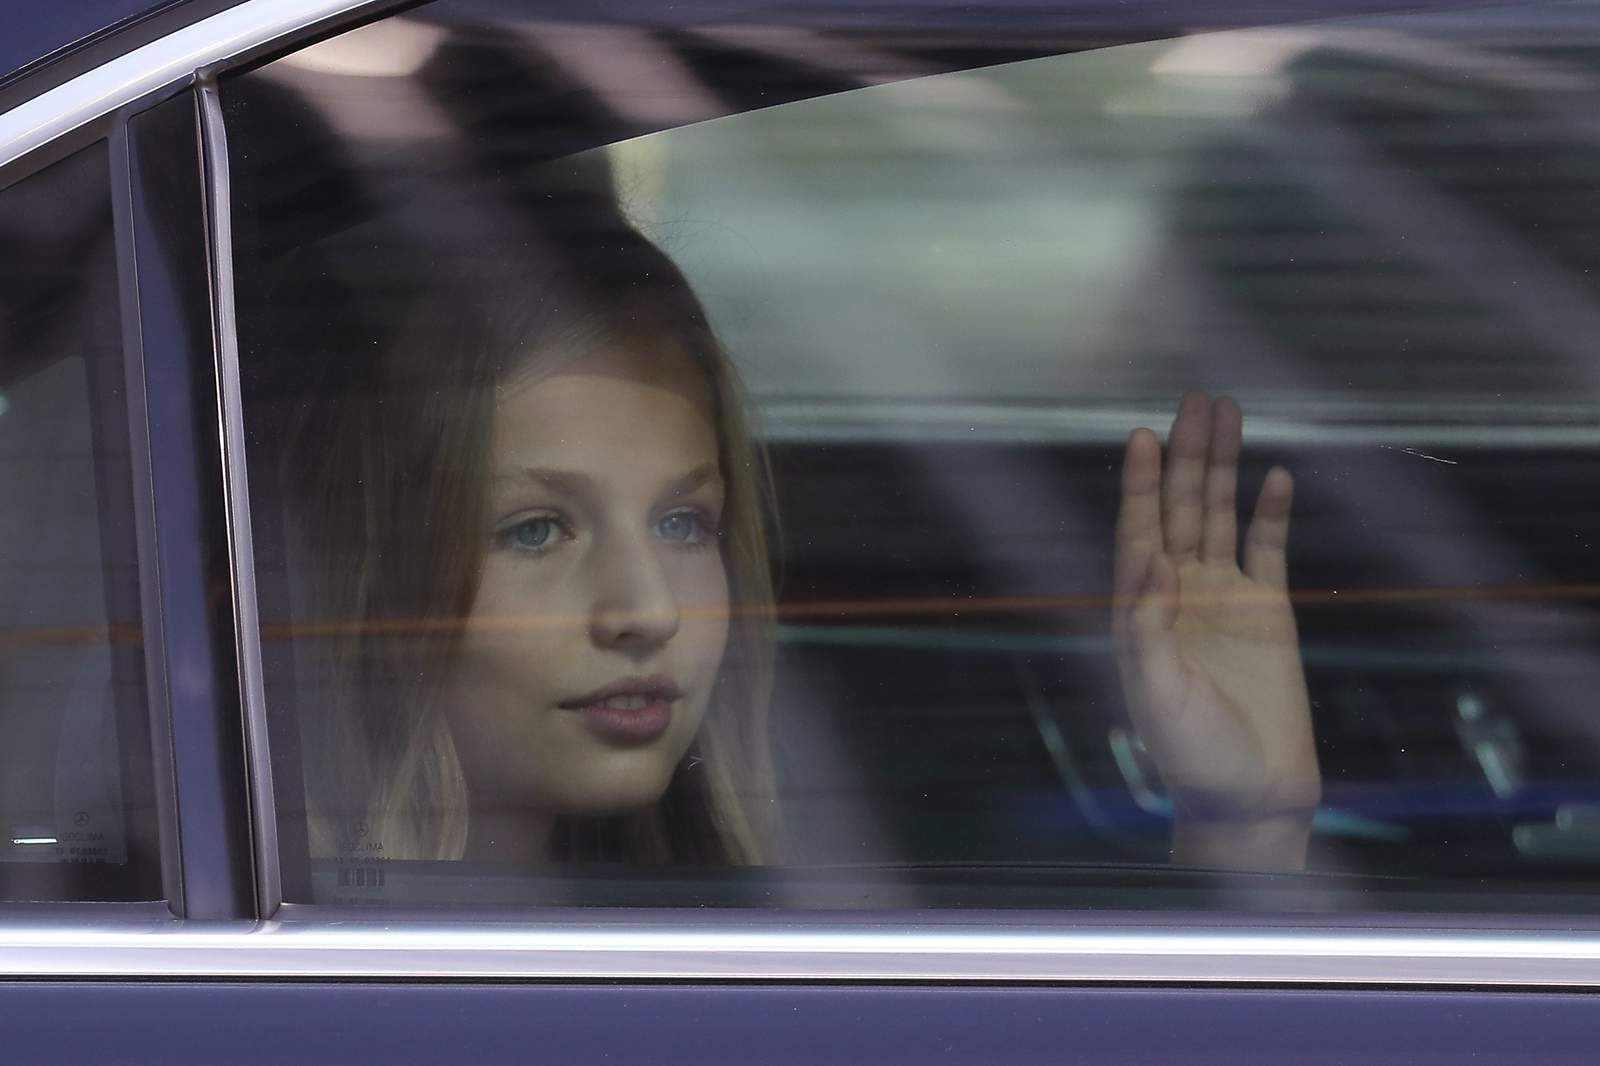 Princess Leonor, heir to Spanish throne, to study in Wales